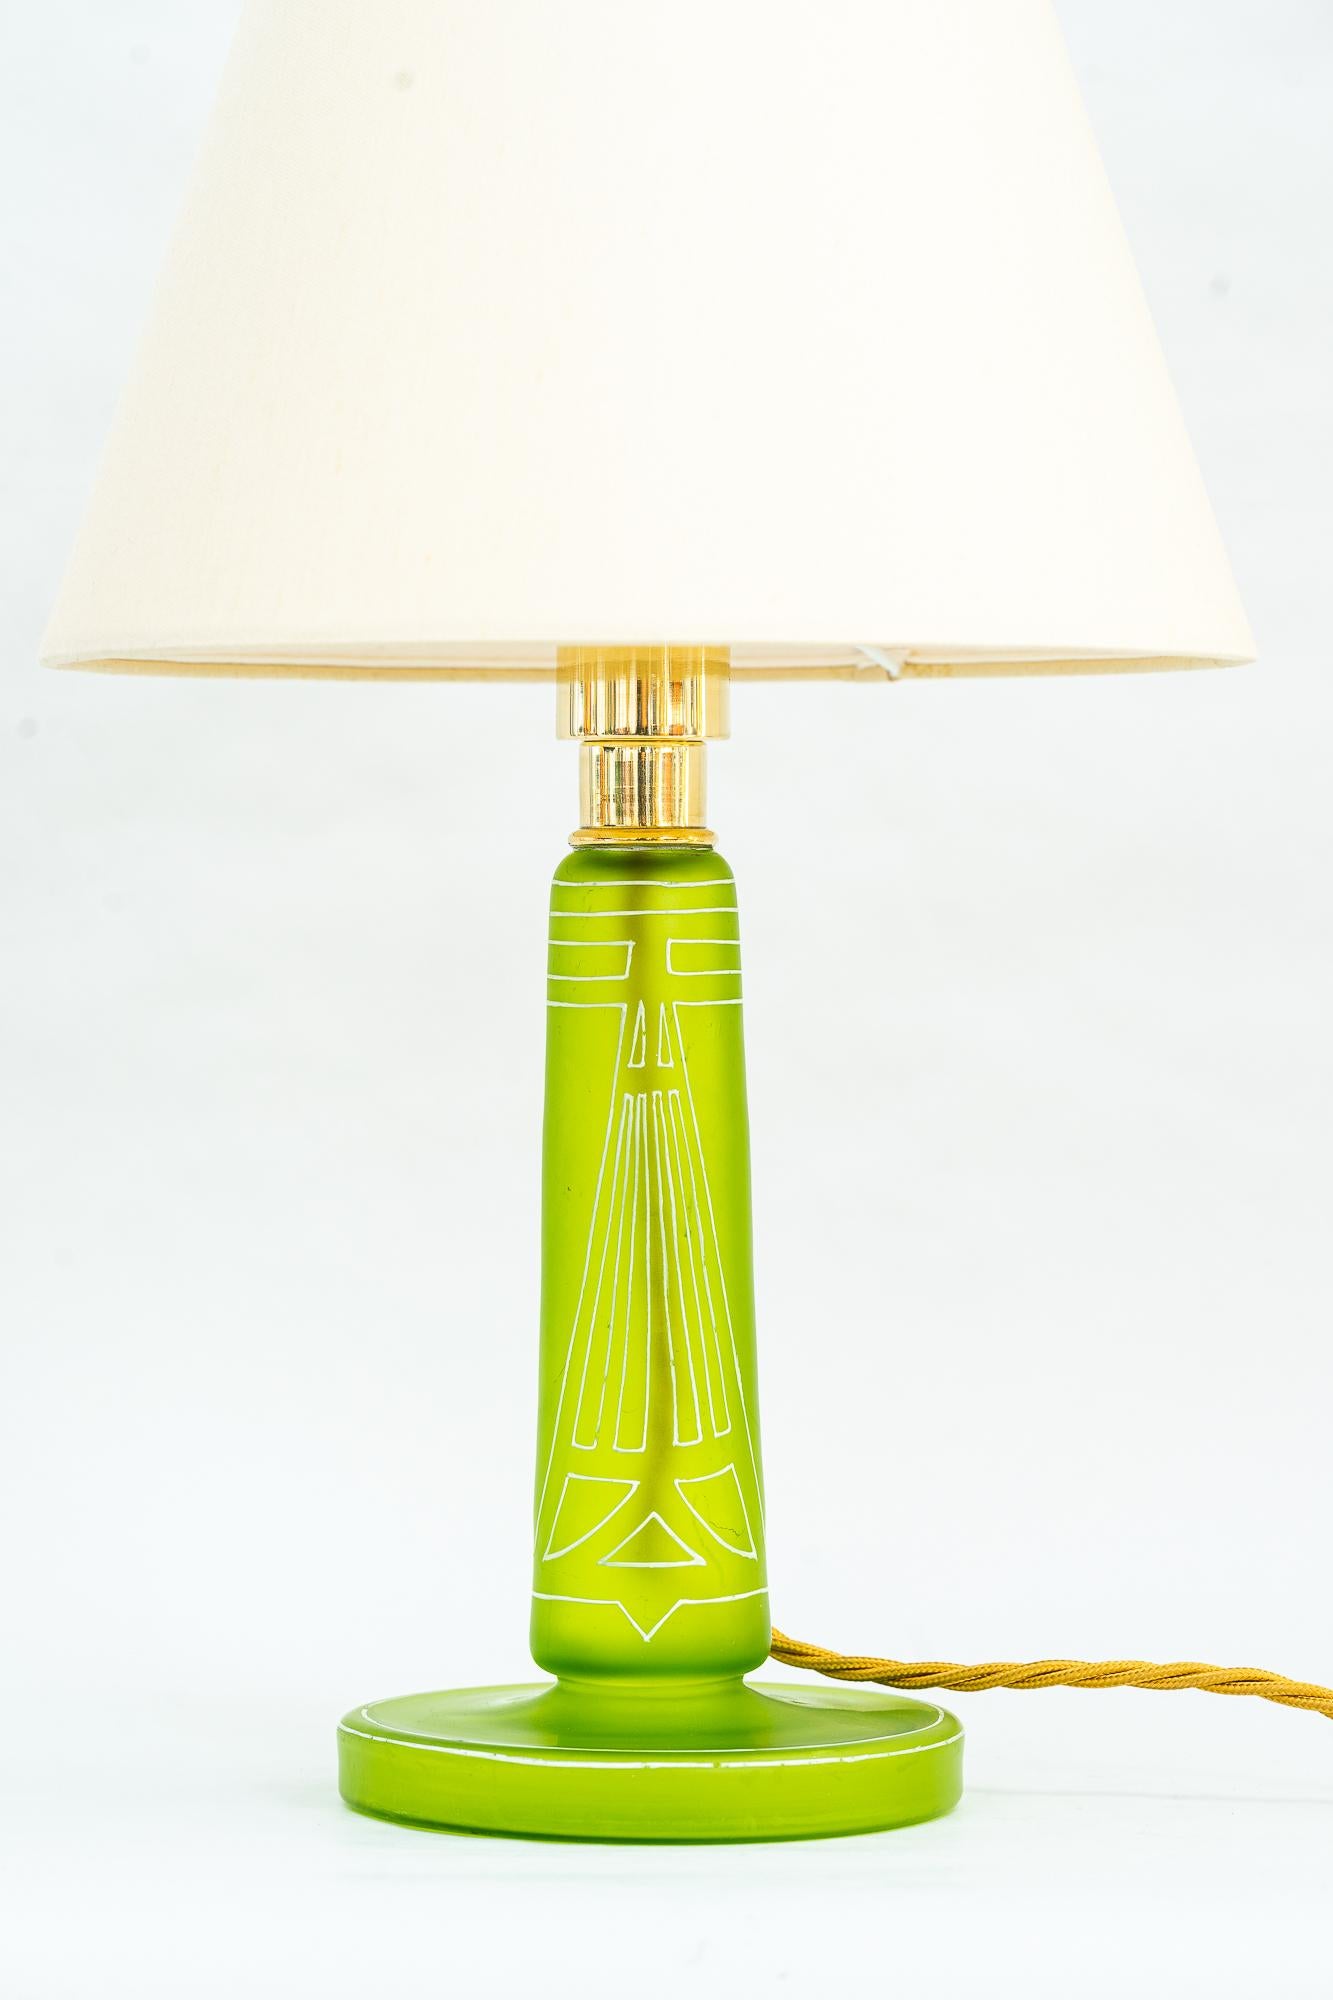 Art Deco table lamp with fabric shade vienna around 1920s 
Original condition
Fabric shade is replaced ( new ).